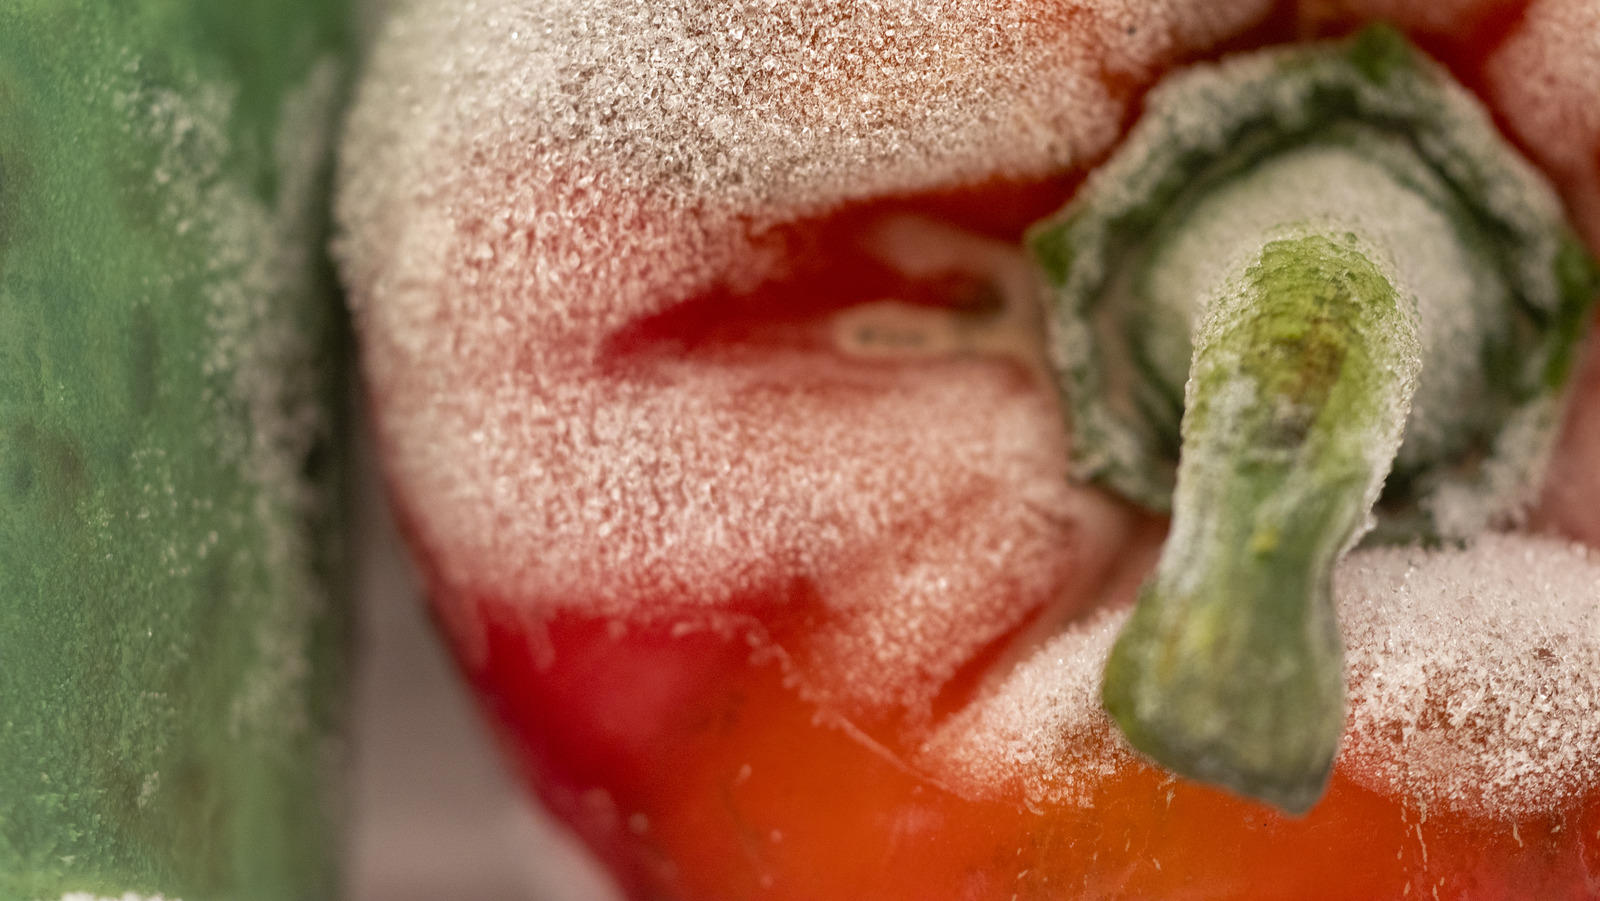 Is It Dangerous To Eat Moldy Bell Peppers? - Tasting Table